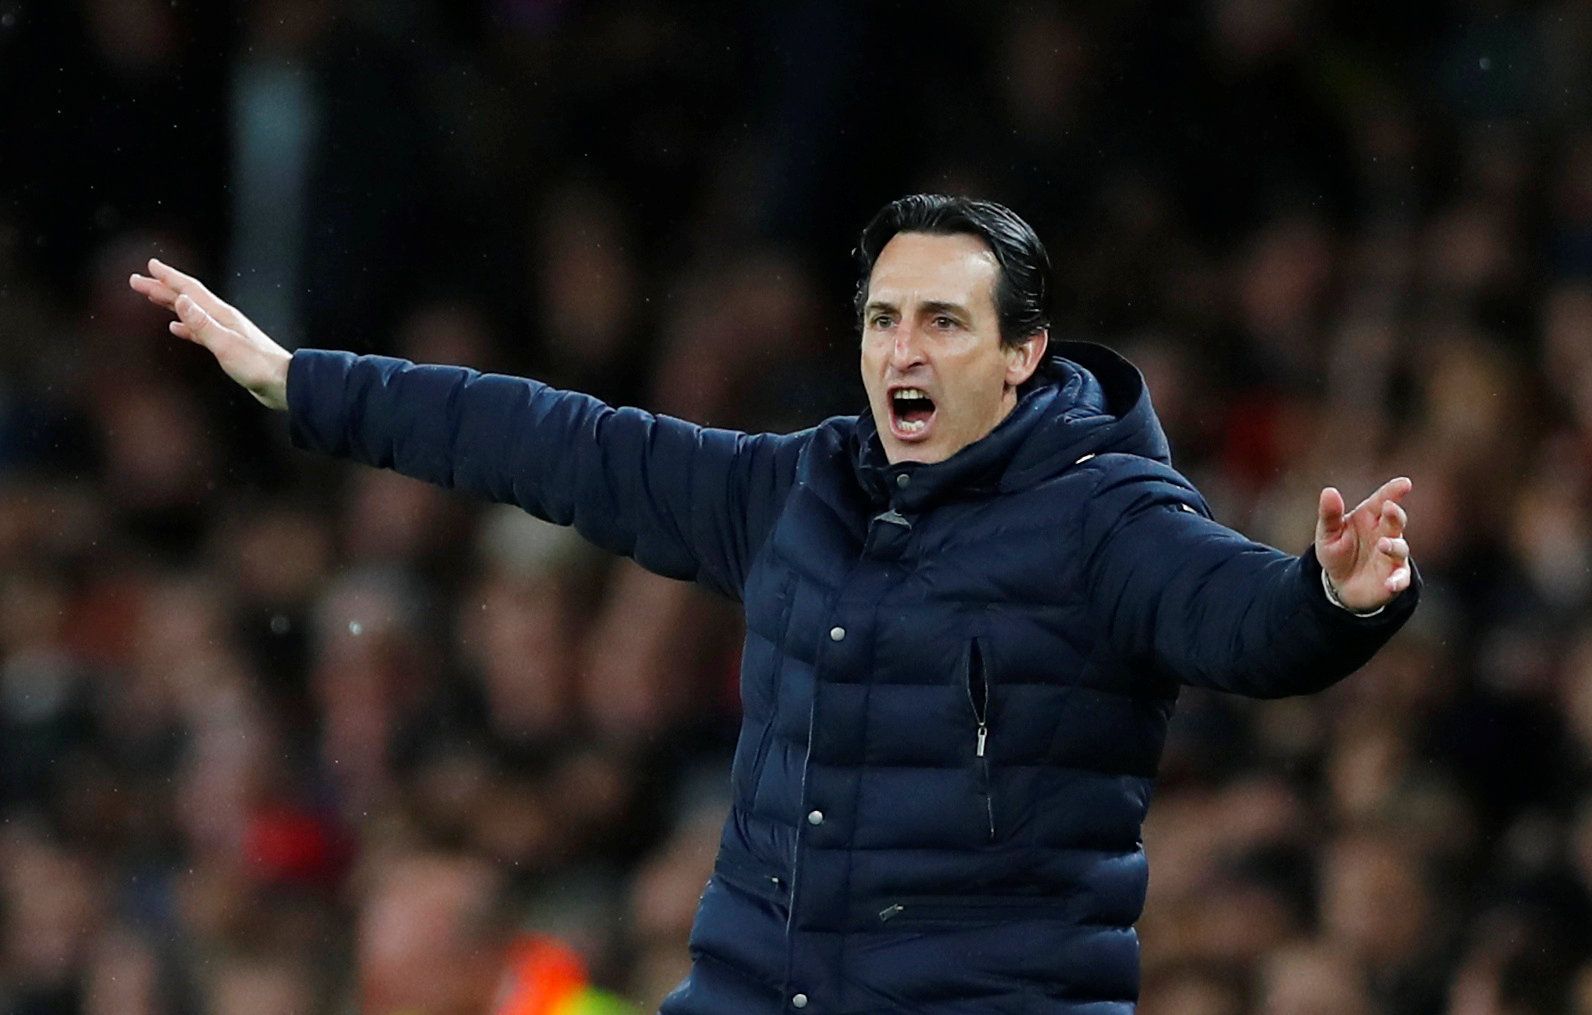 Soccer Football - Premier League - Arsenal v Manchester United - Emirates Stadium, London, Britain - March 10, 2019  Arsenal manager Unai Emery during the match                REUTERS/Eddie Keogh  EDITORIAL USE ONLY. No use with unauthorized audio, video, data, fixture lists, club/league logos or 